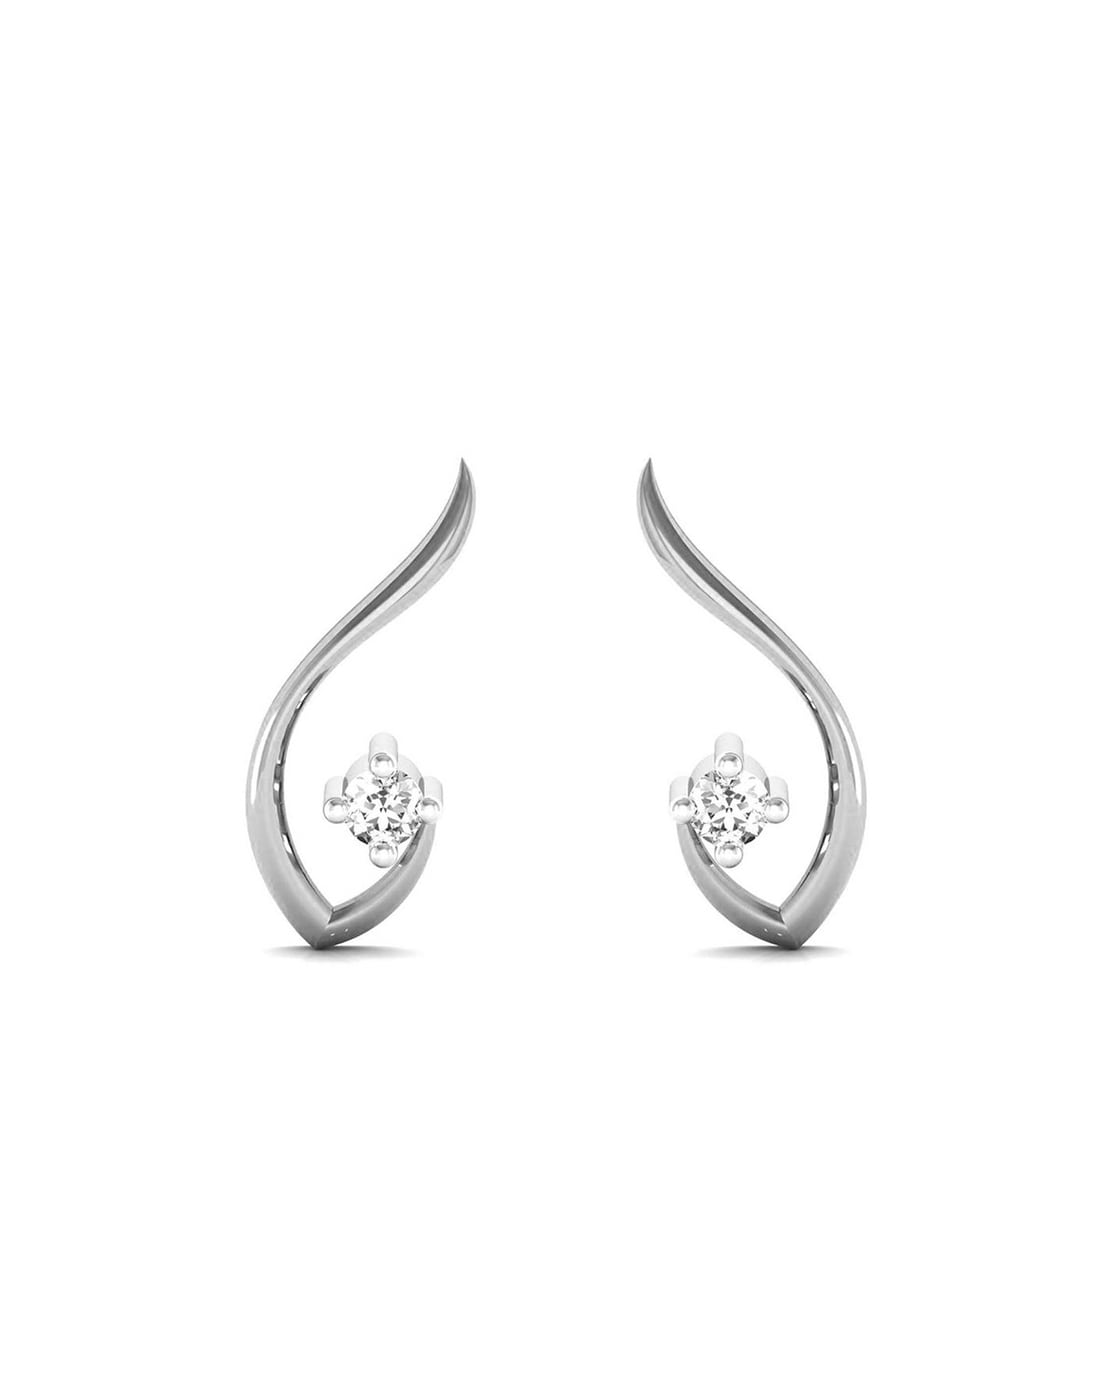 Buy Sui Dhaga White Gold Earrings Online from Vaibhav Jewellers